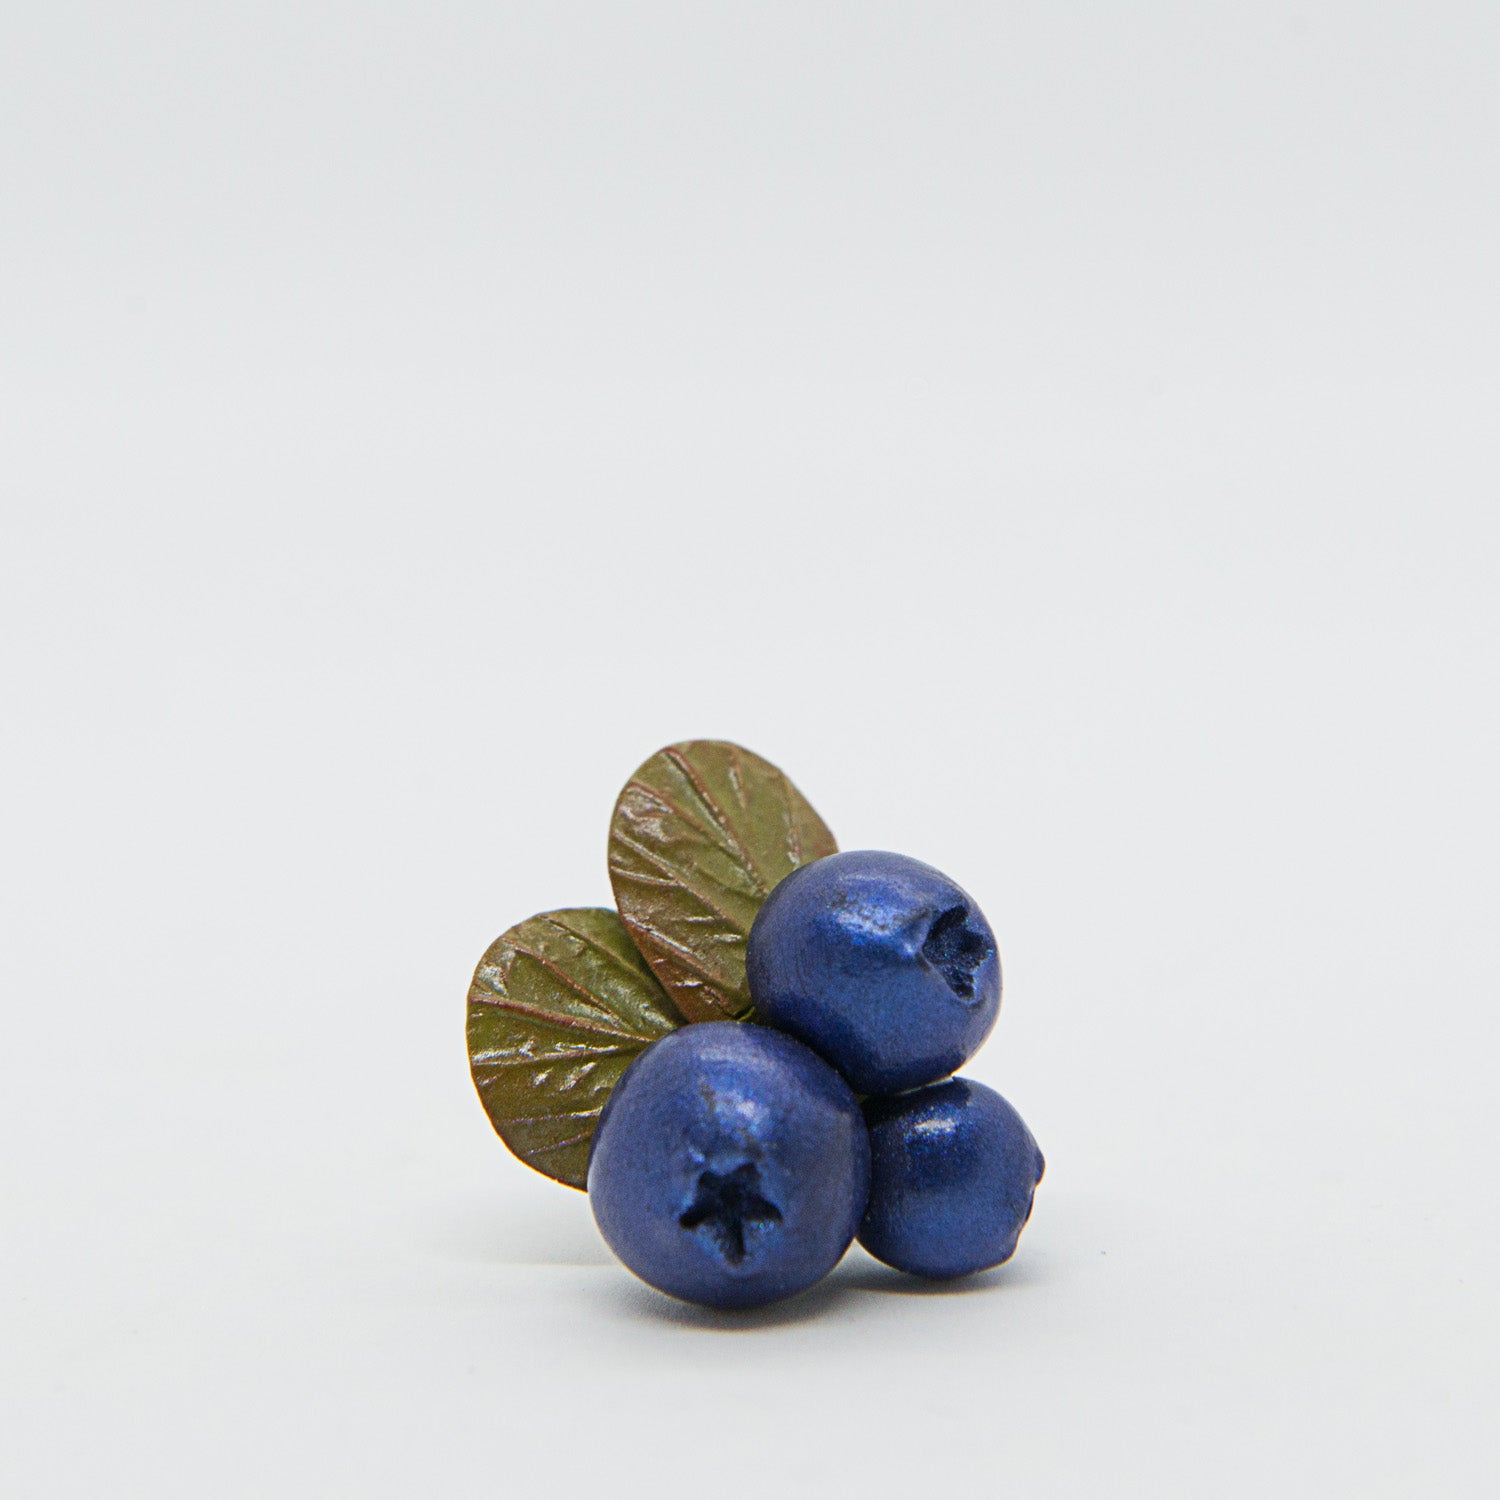 Pin with Blueberries